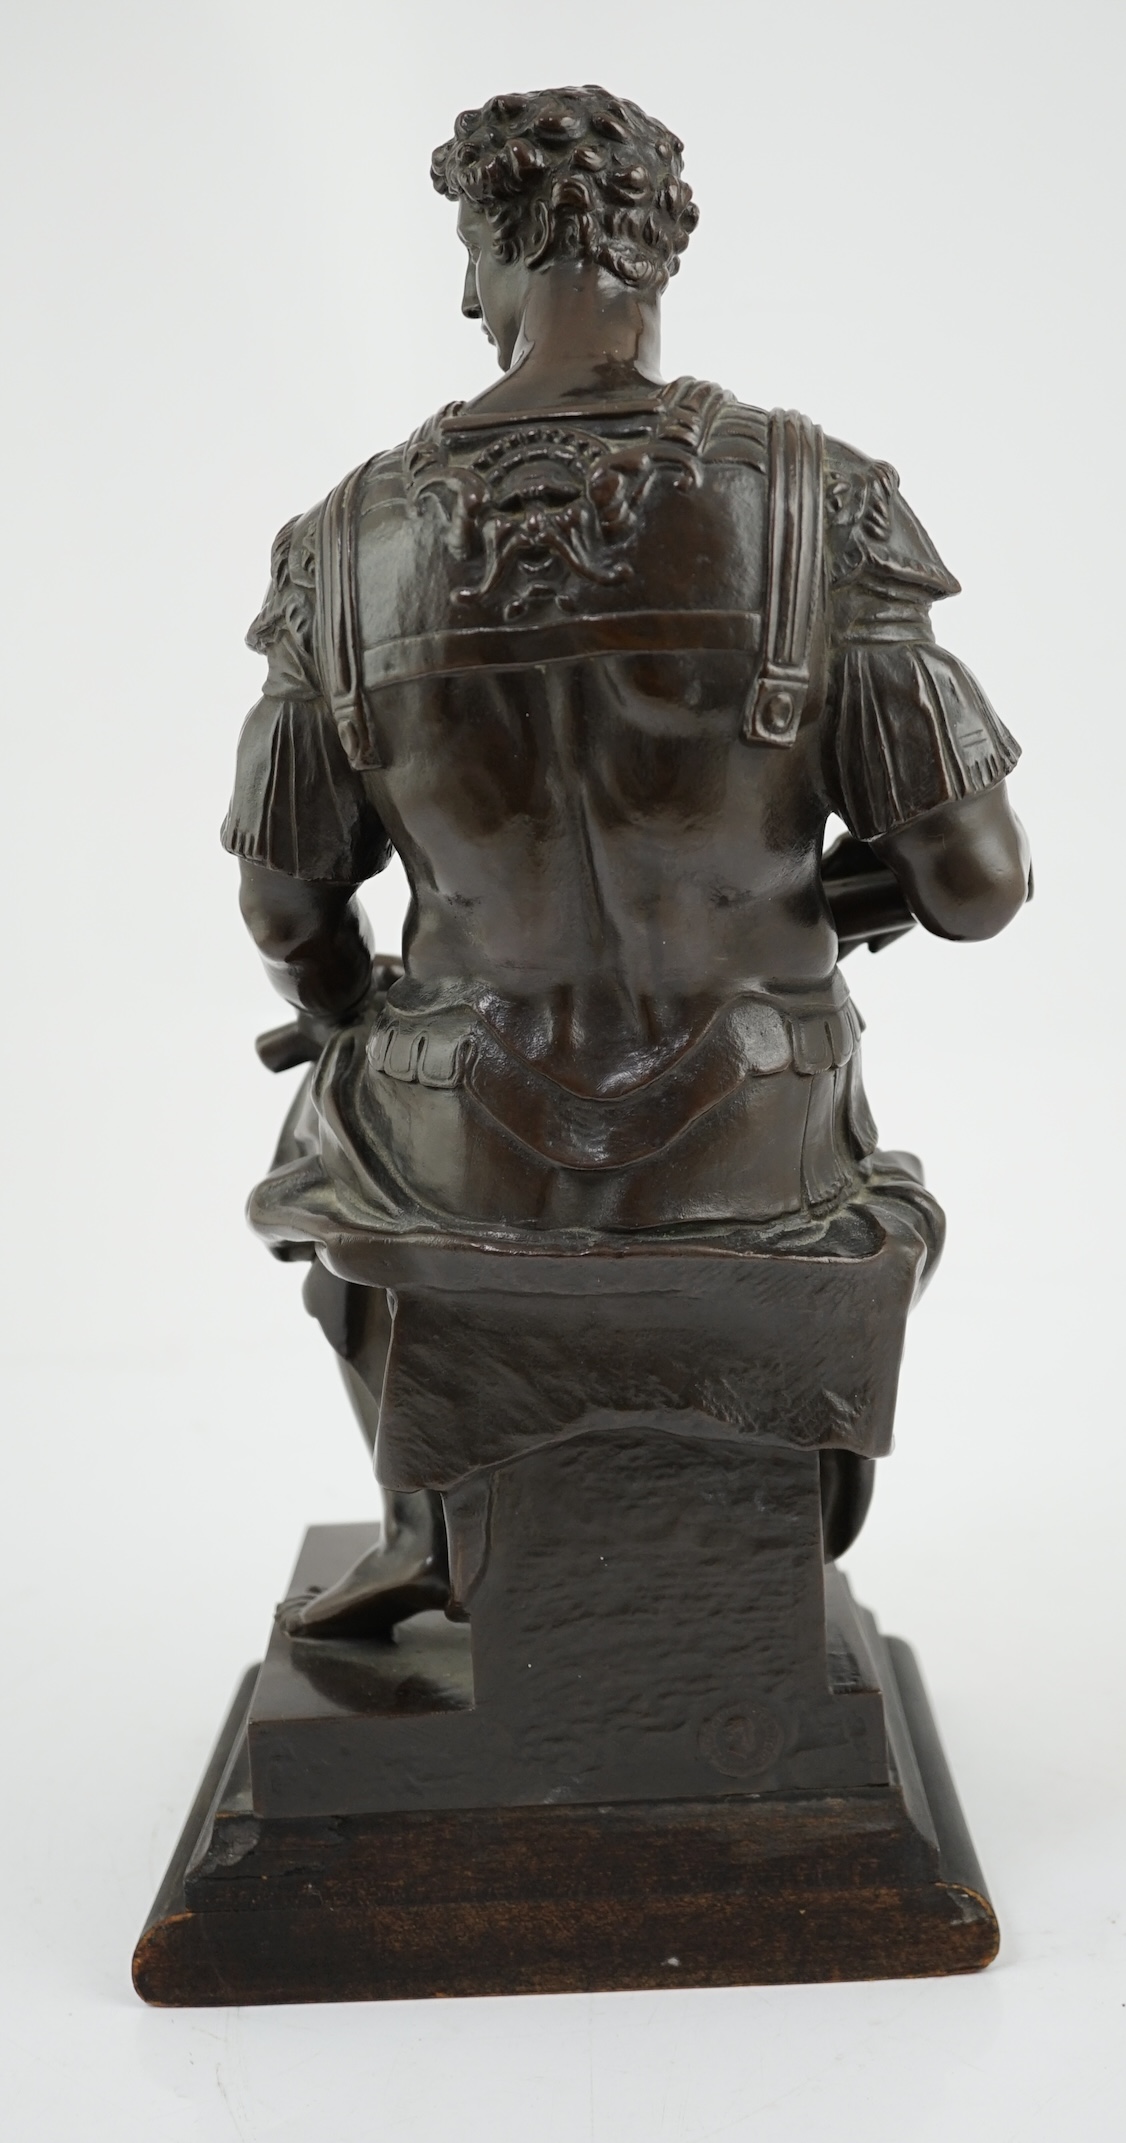 Ferdinand Barbedienne (1810-1892), a French bronze of a Roman seated centurion